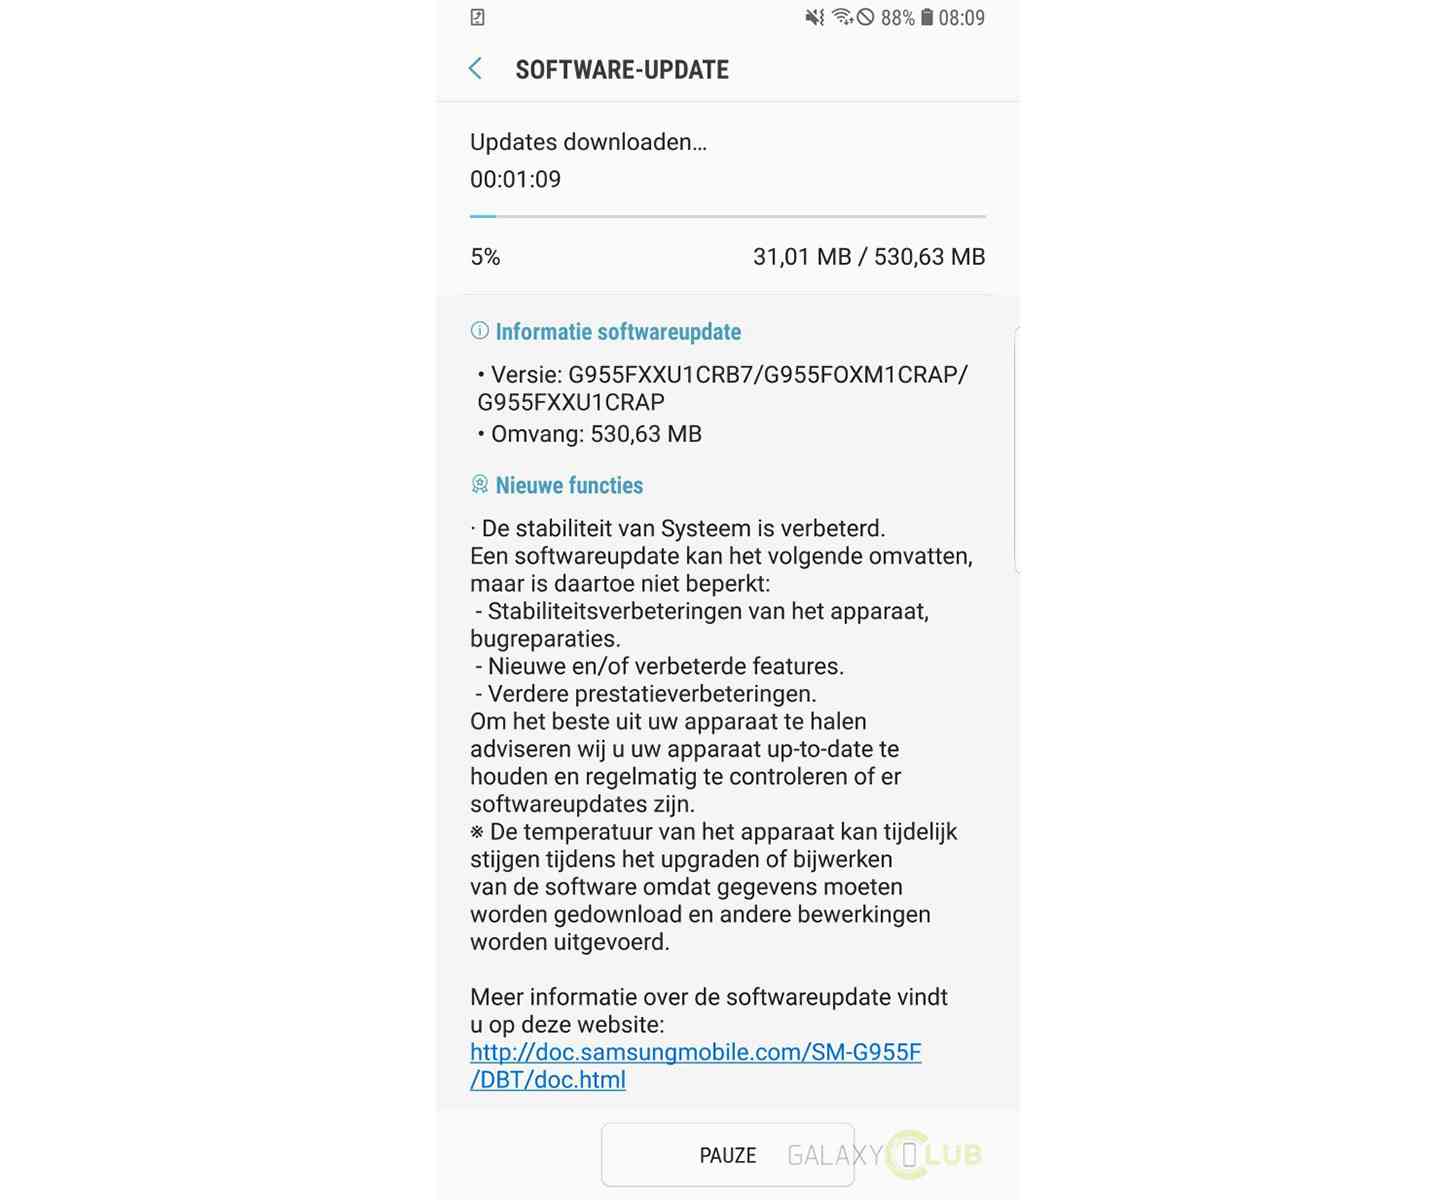 Samsung Galaxy S8 Android 8.0 Oreo update